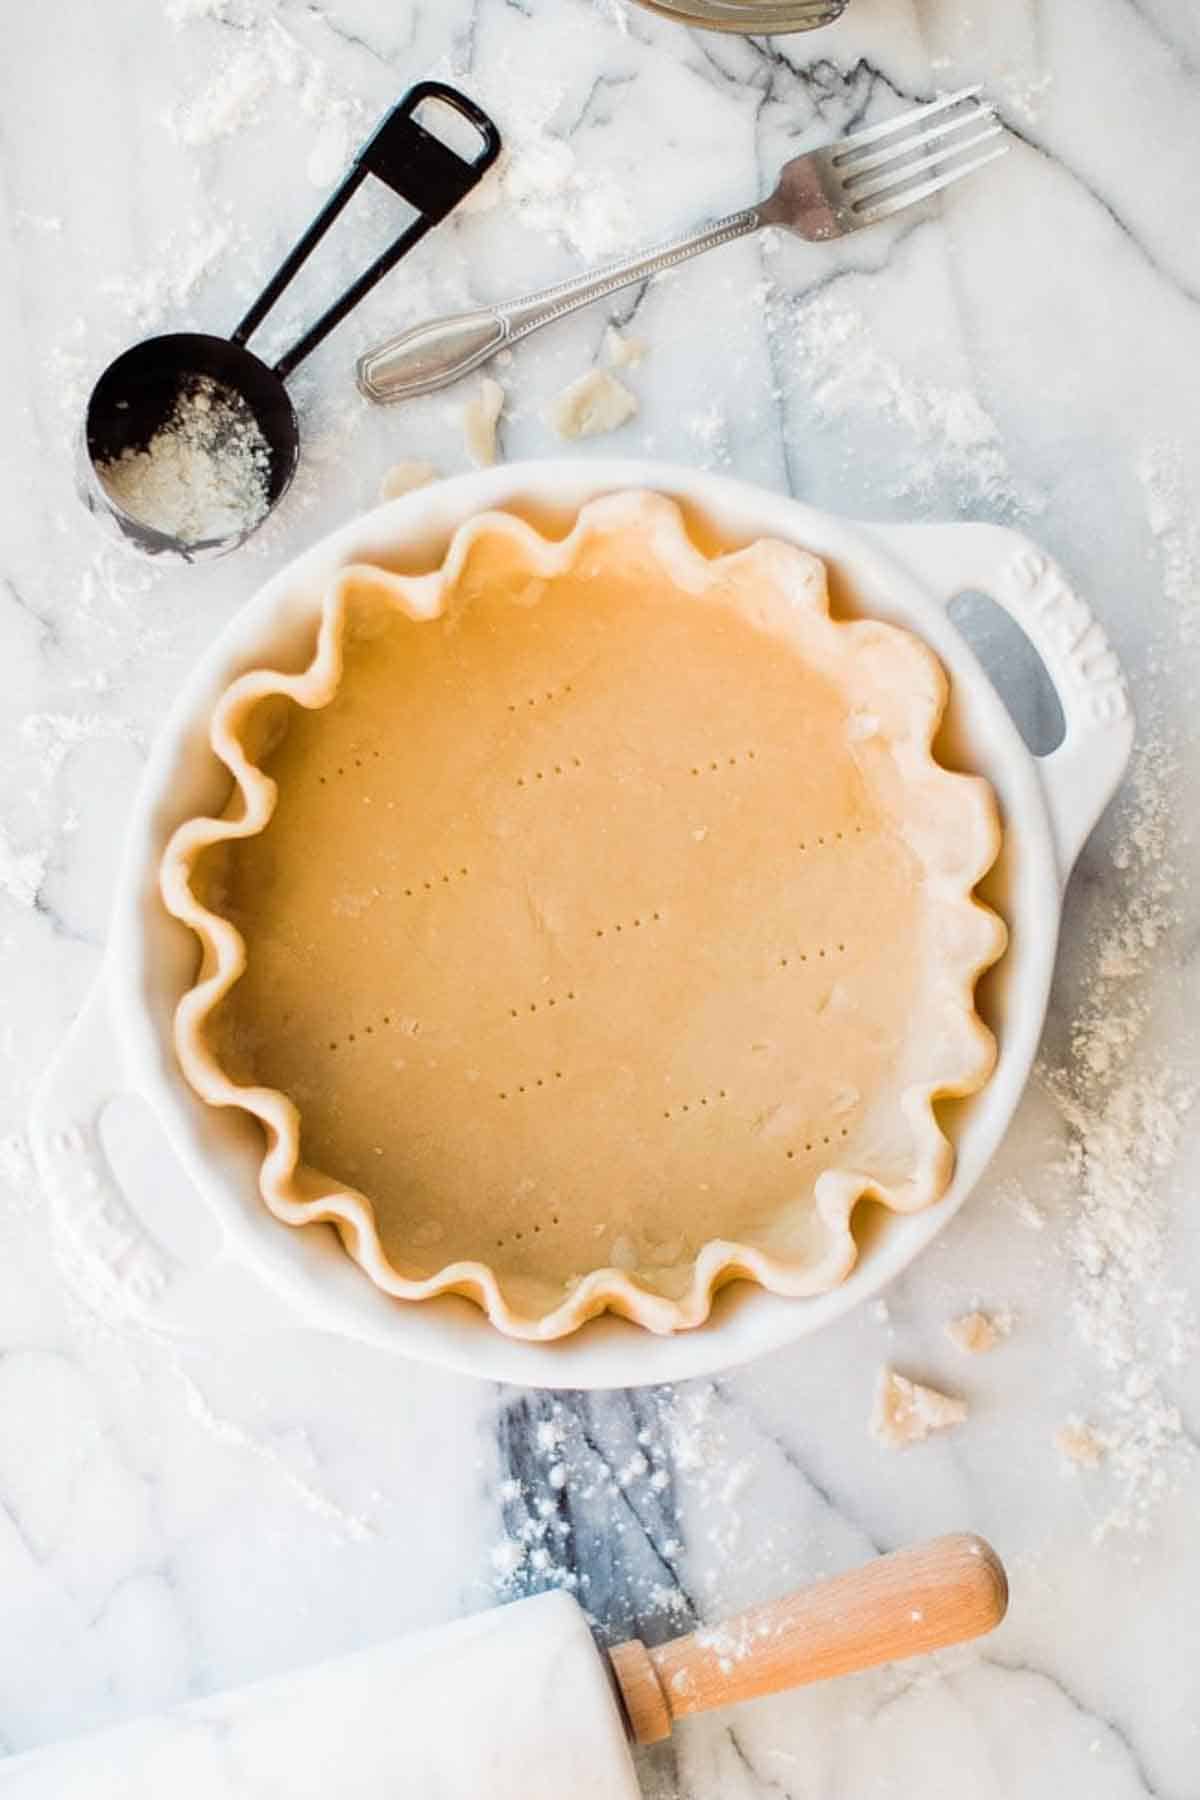 A simple pie crust in a baking dish ready to fill.